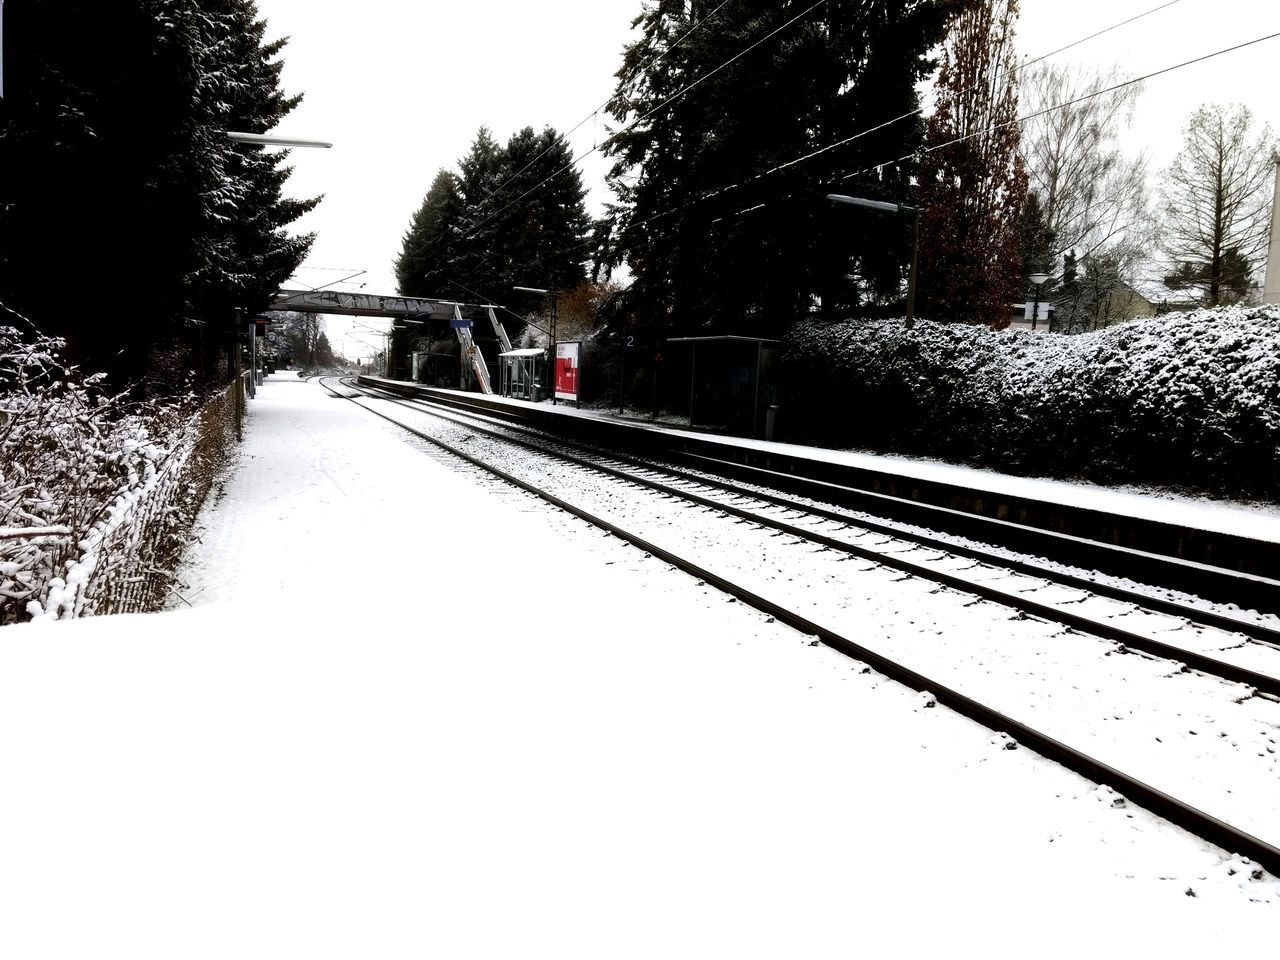 VIEW OF RAILWAY TRACKS IN WINTER